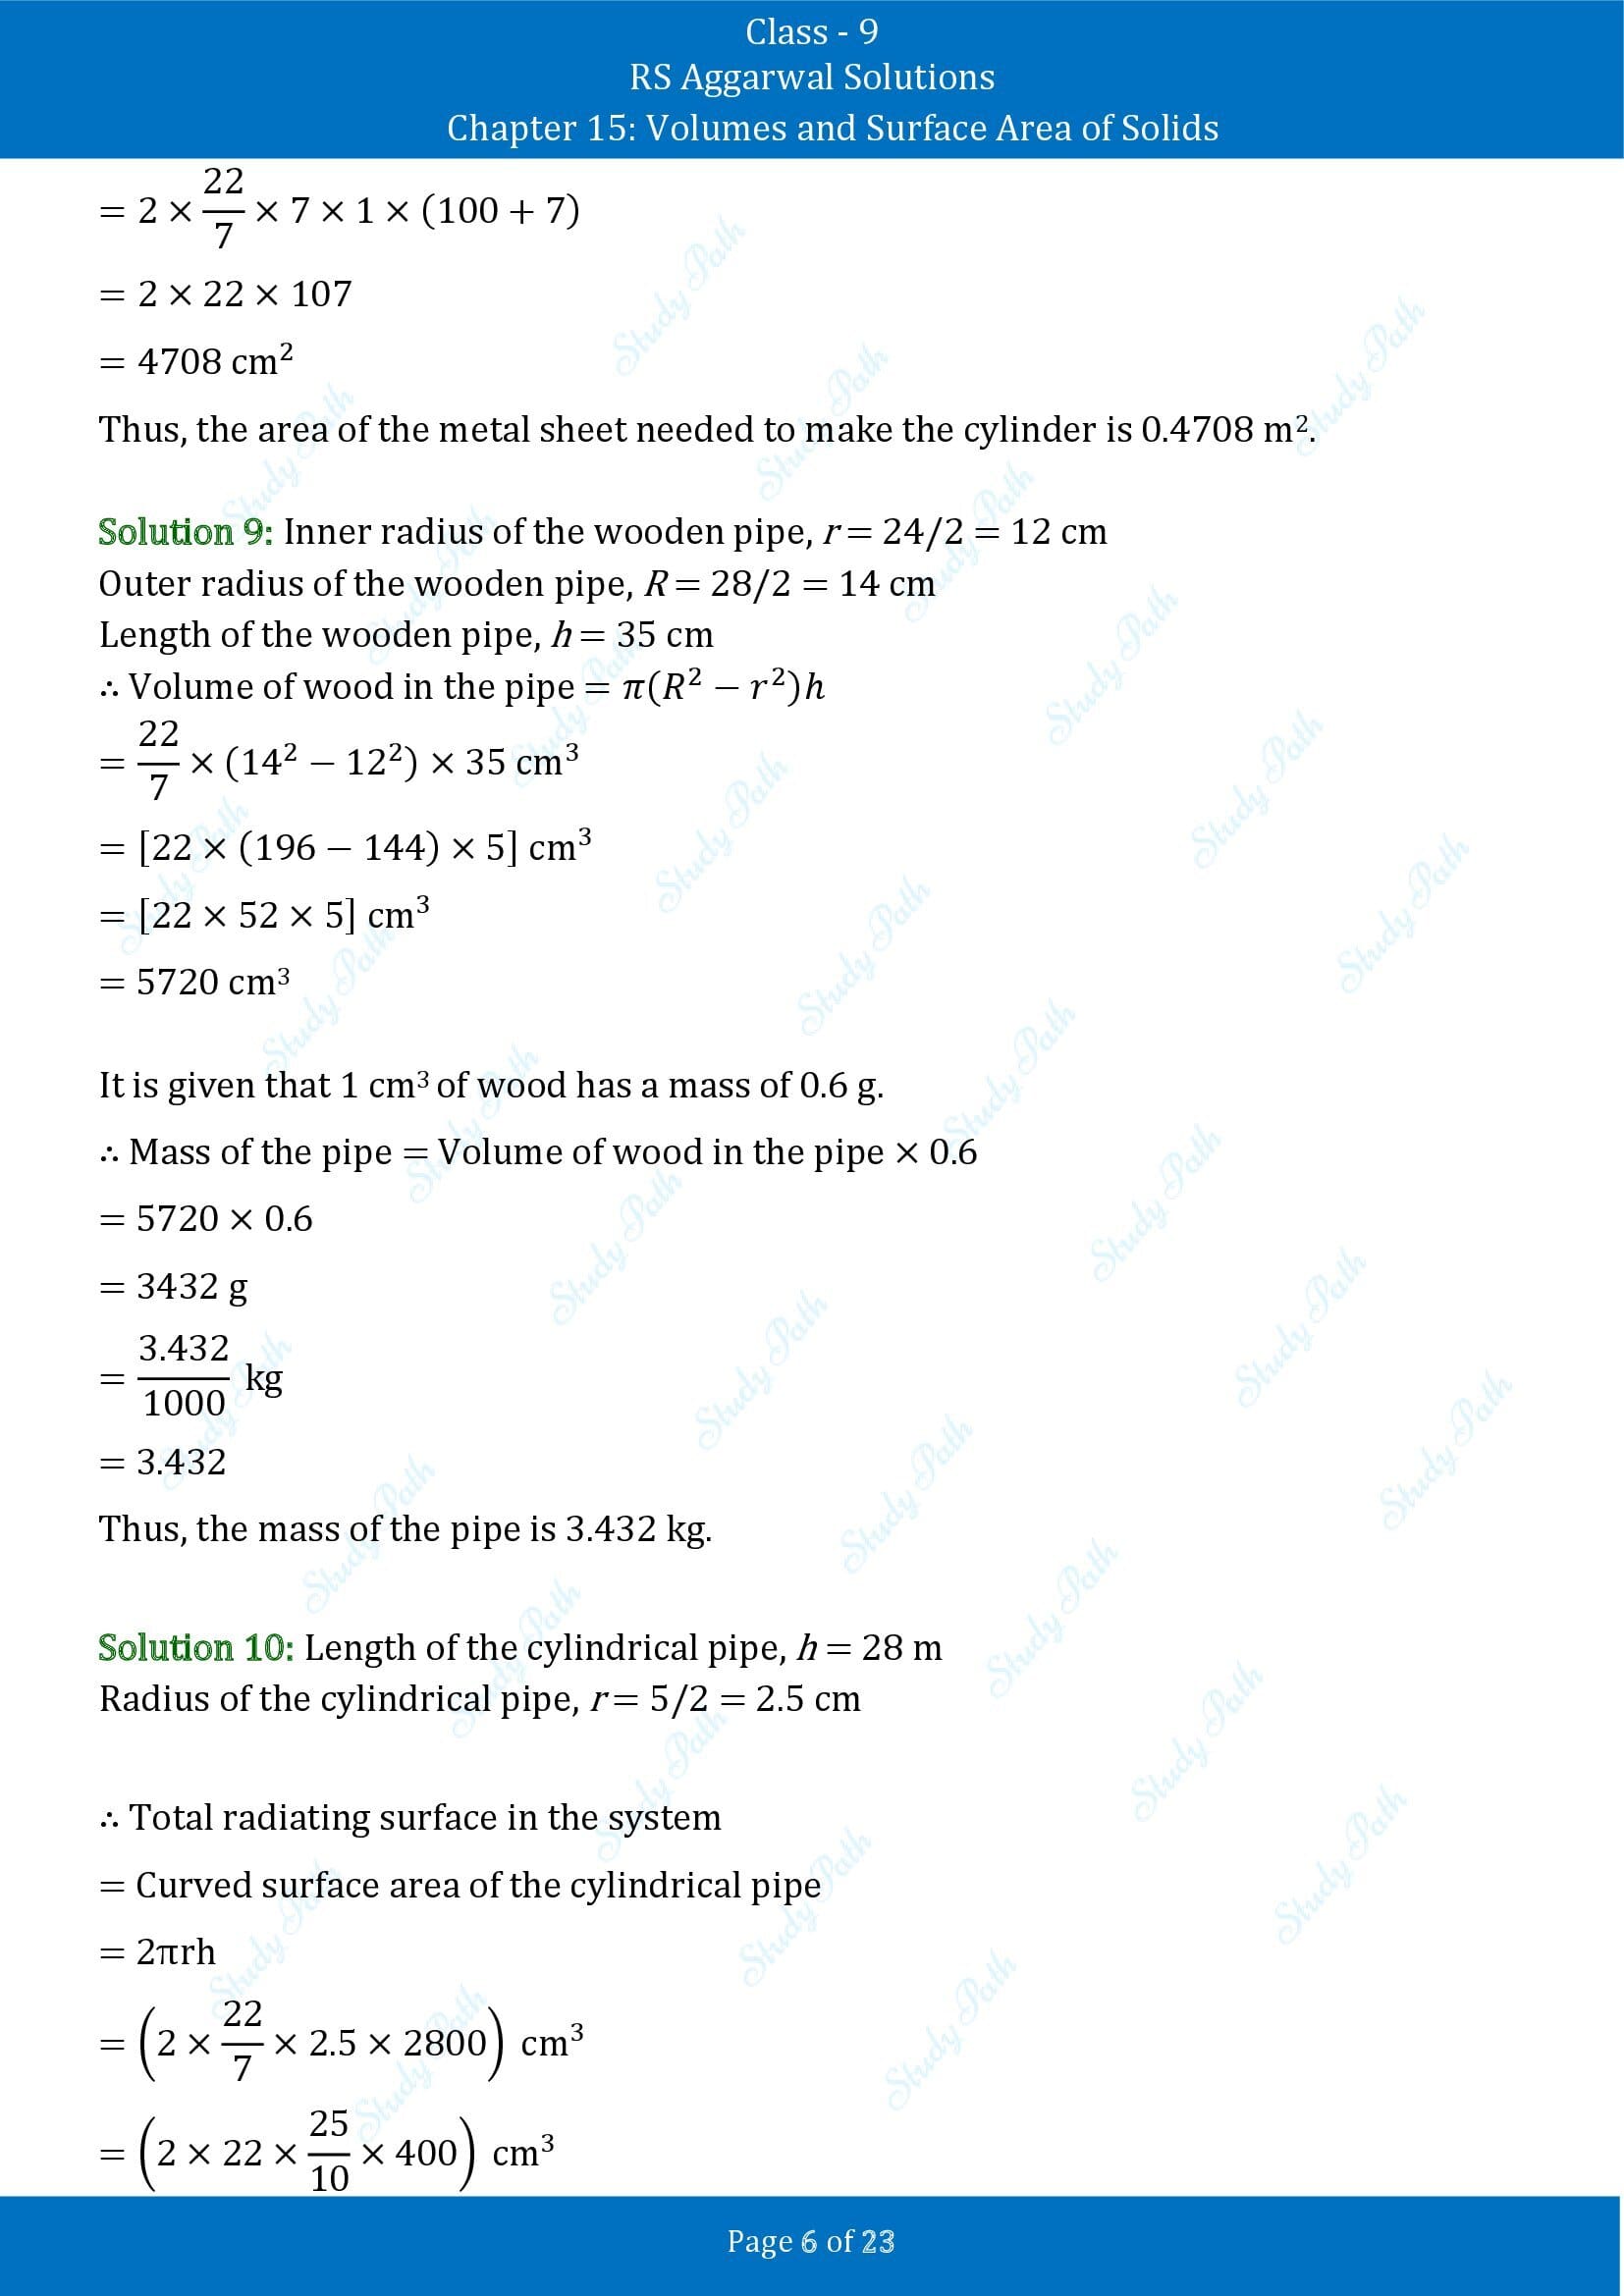 RS Aggarwal Solutions Class 9 Chapter 15 Volumes and Surface Area of Solids Exercise 15B 00006